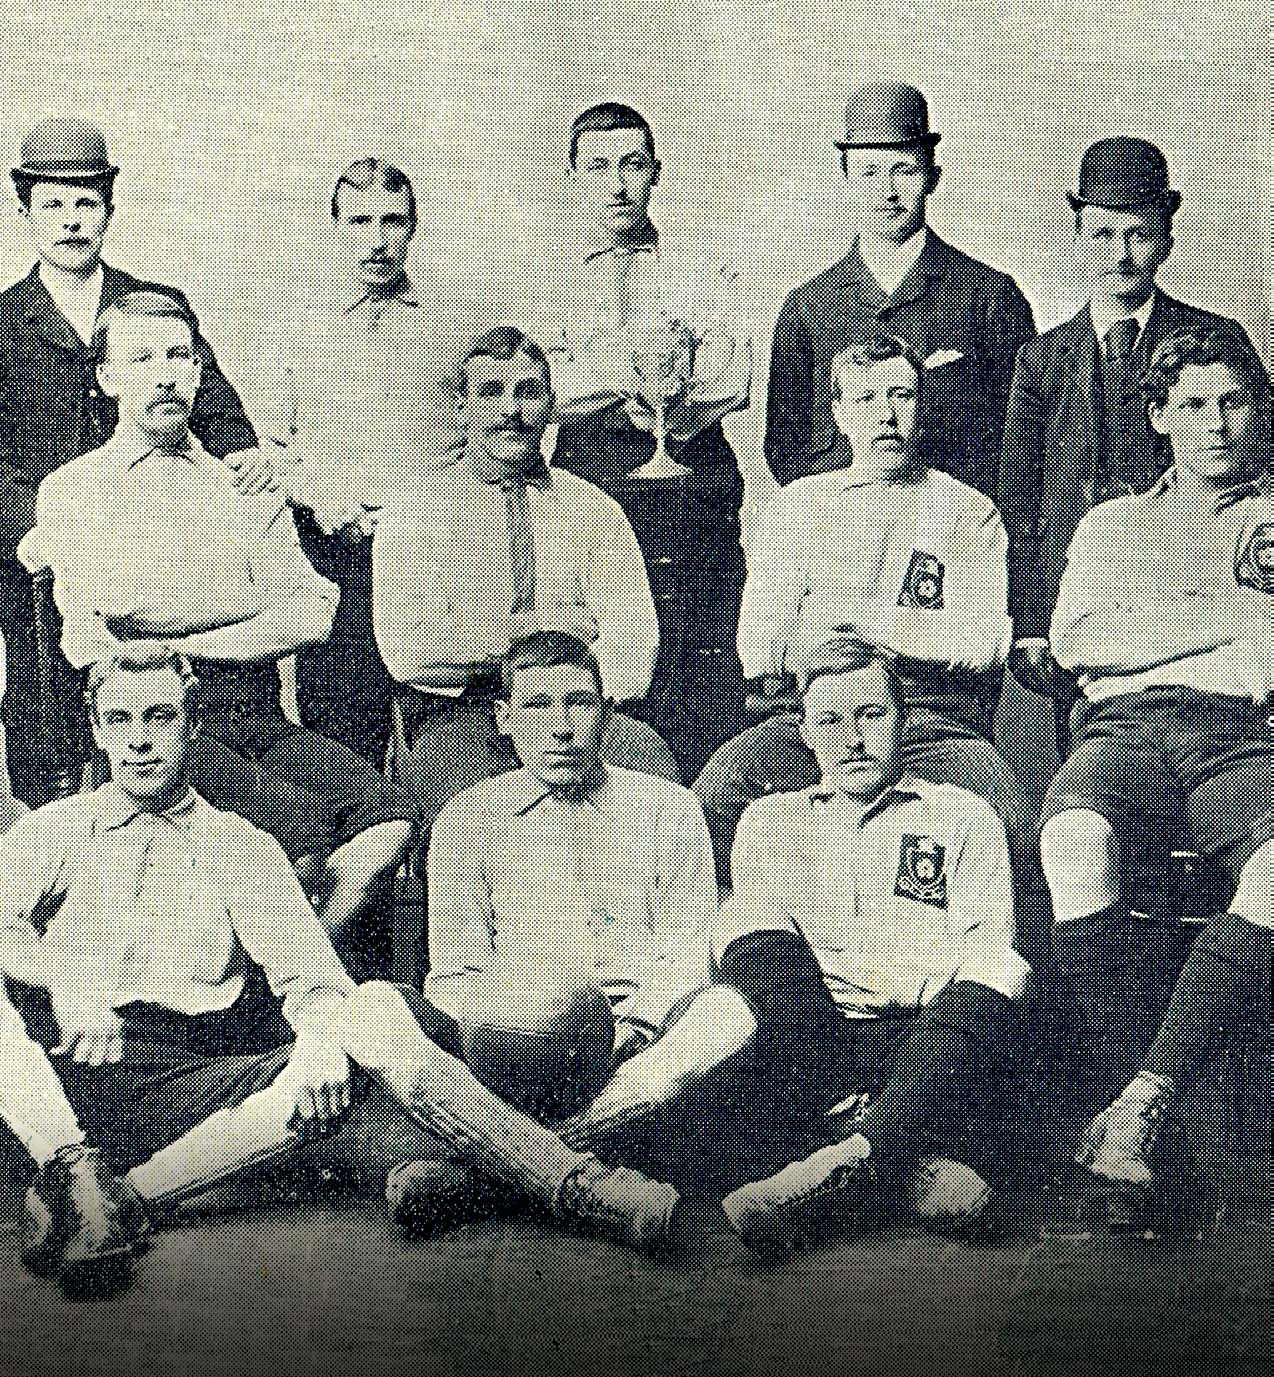 The 1890 Leicestershire County Cup winning team. The club’s first trophy. - Leicester City Football Club